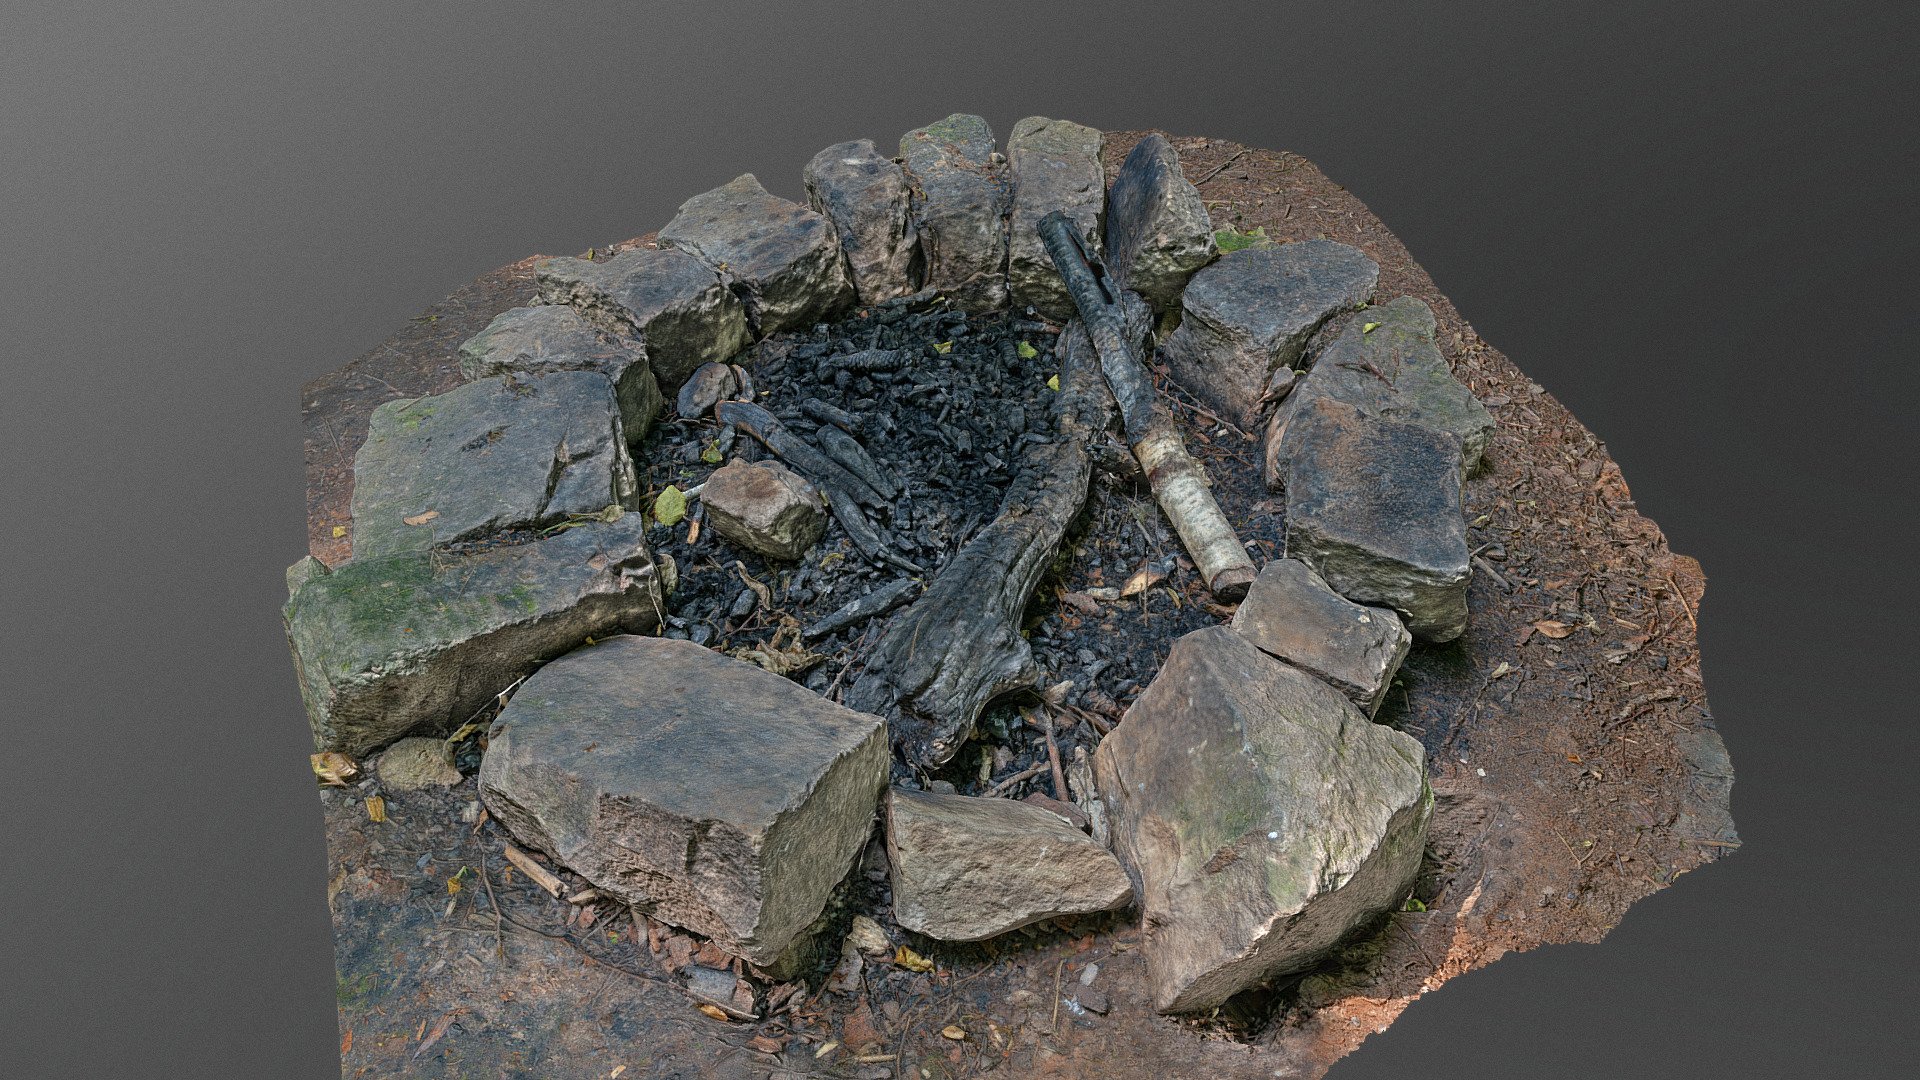 Stone Fireplace fire pit hole ash, campfire with big stones and concrete chunks and small charred burned charcoal logs

Photogrammetry scan 150x24MP, 3x16K texture + HD Normals - Stone fireplace - Download Free 3D model by matousekfoto 3d model